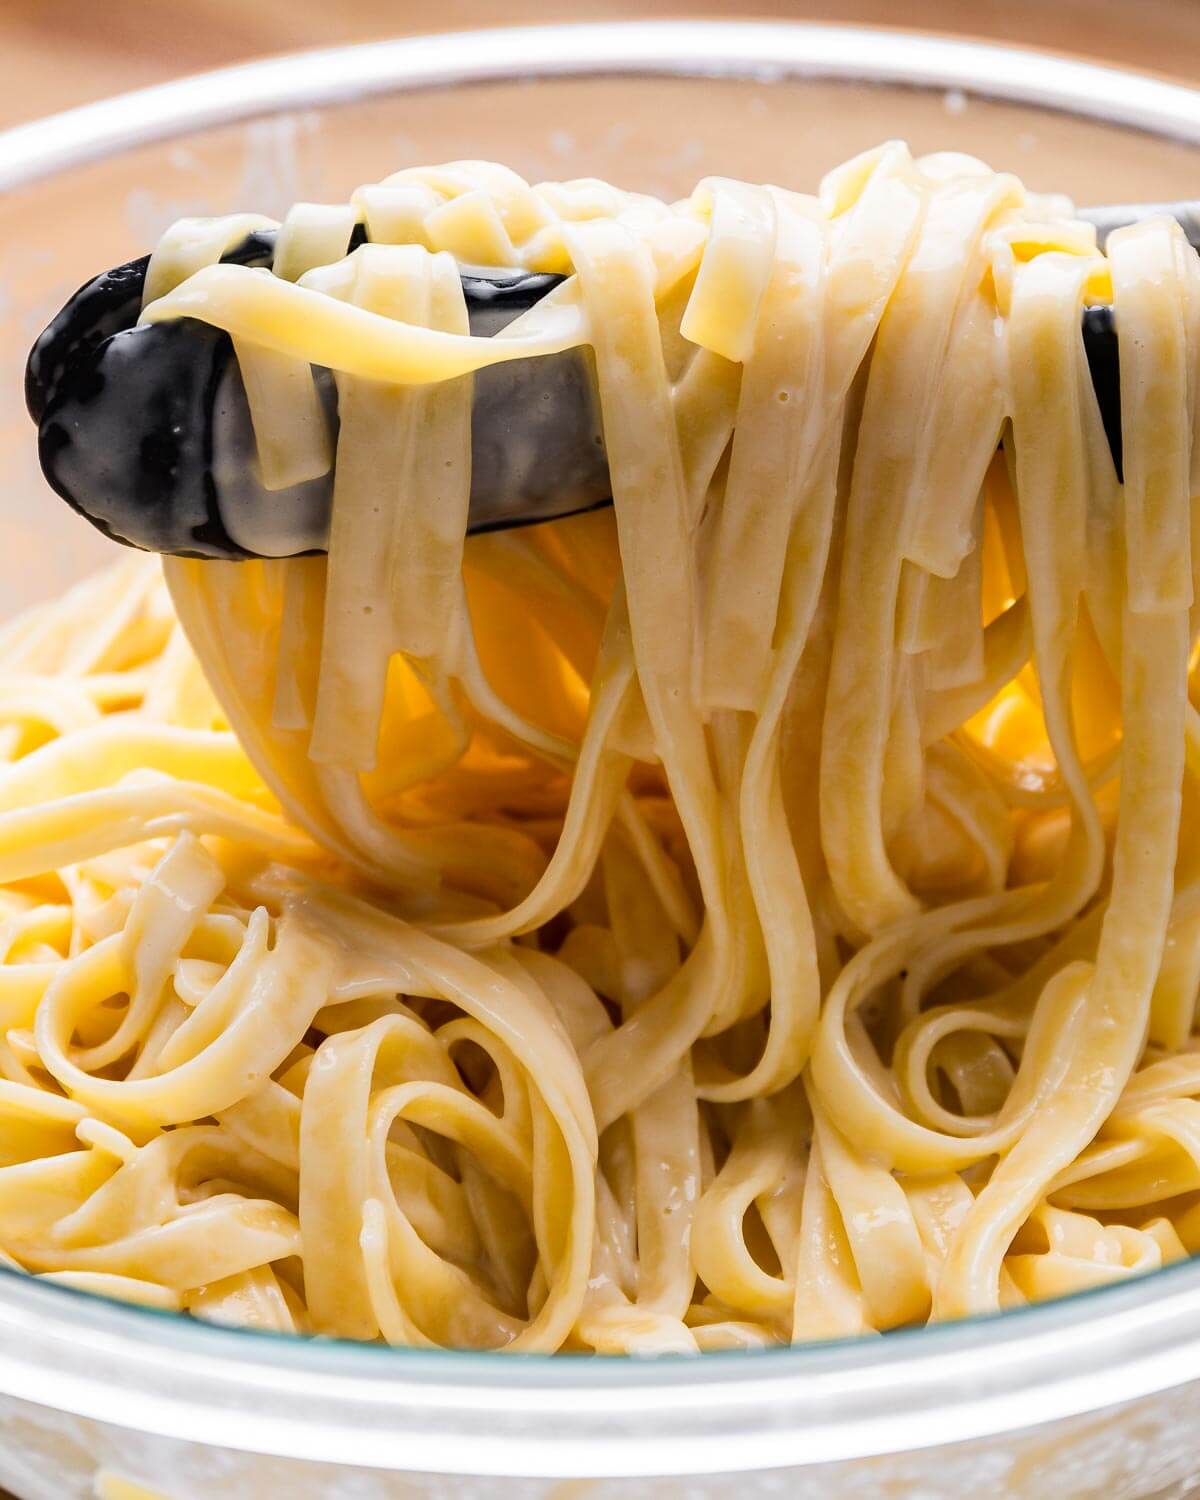 Tongs holding cooked fettuccine alfredo in large glass bowl.